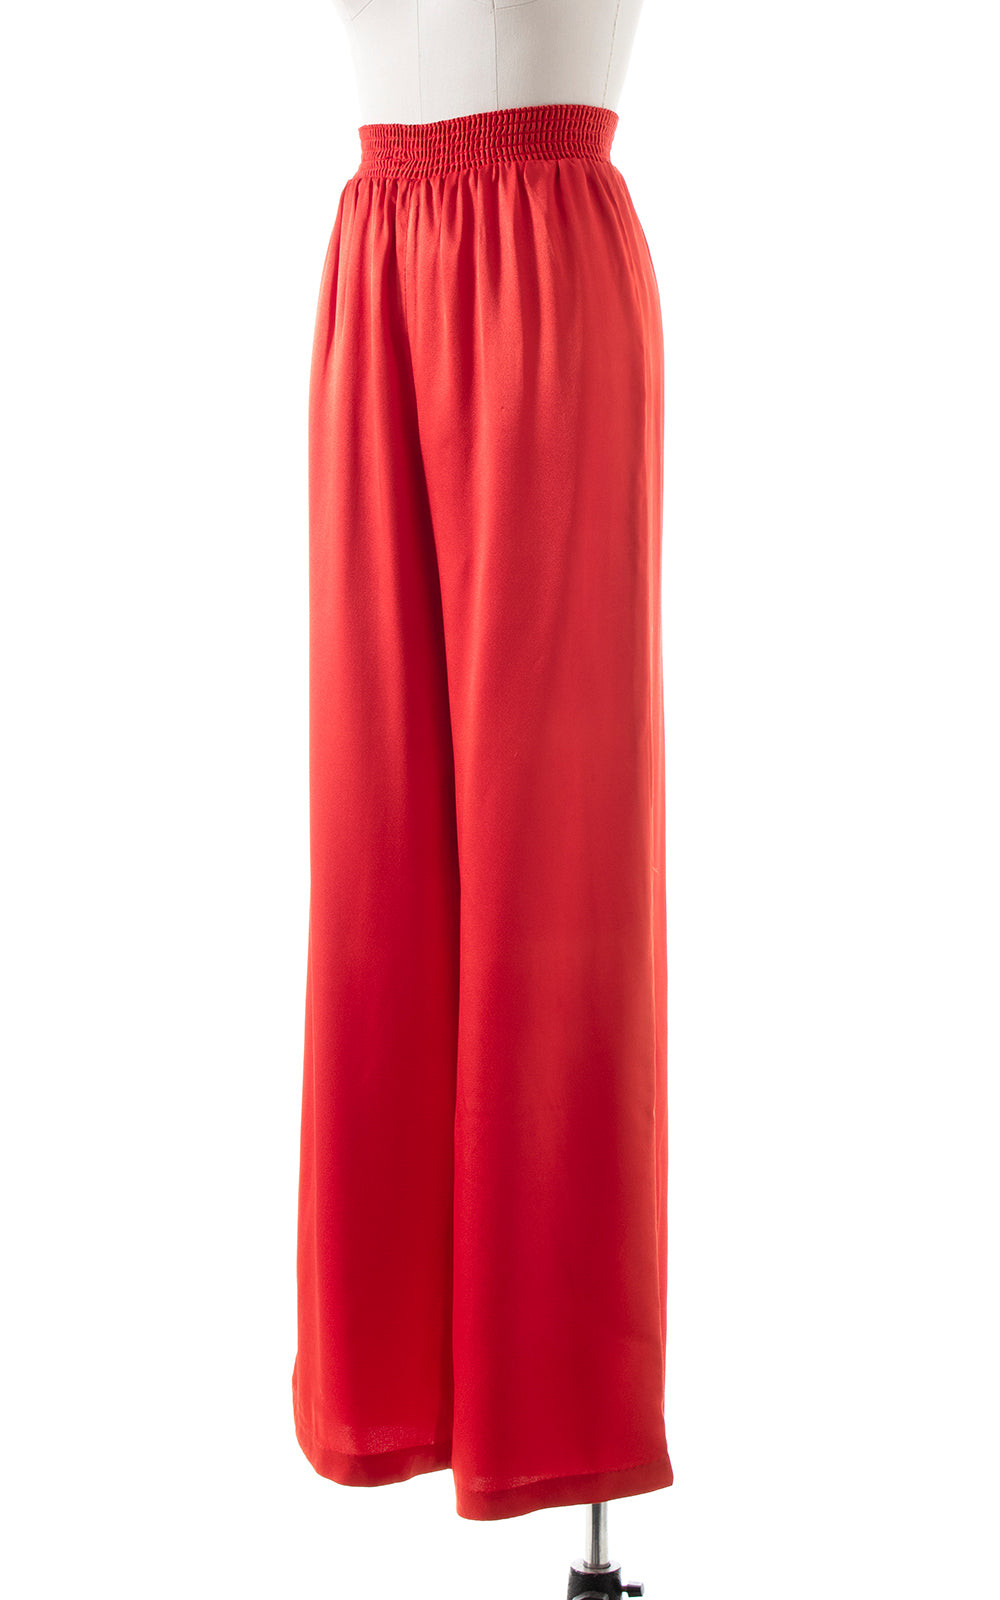 1970s Red Satin Wide Leg Pants | x-small/small